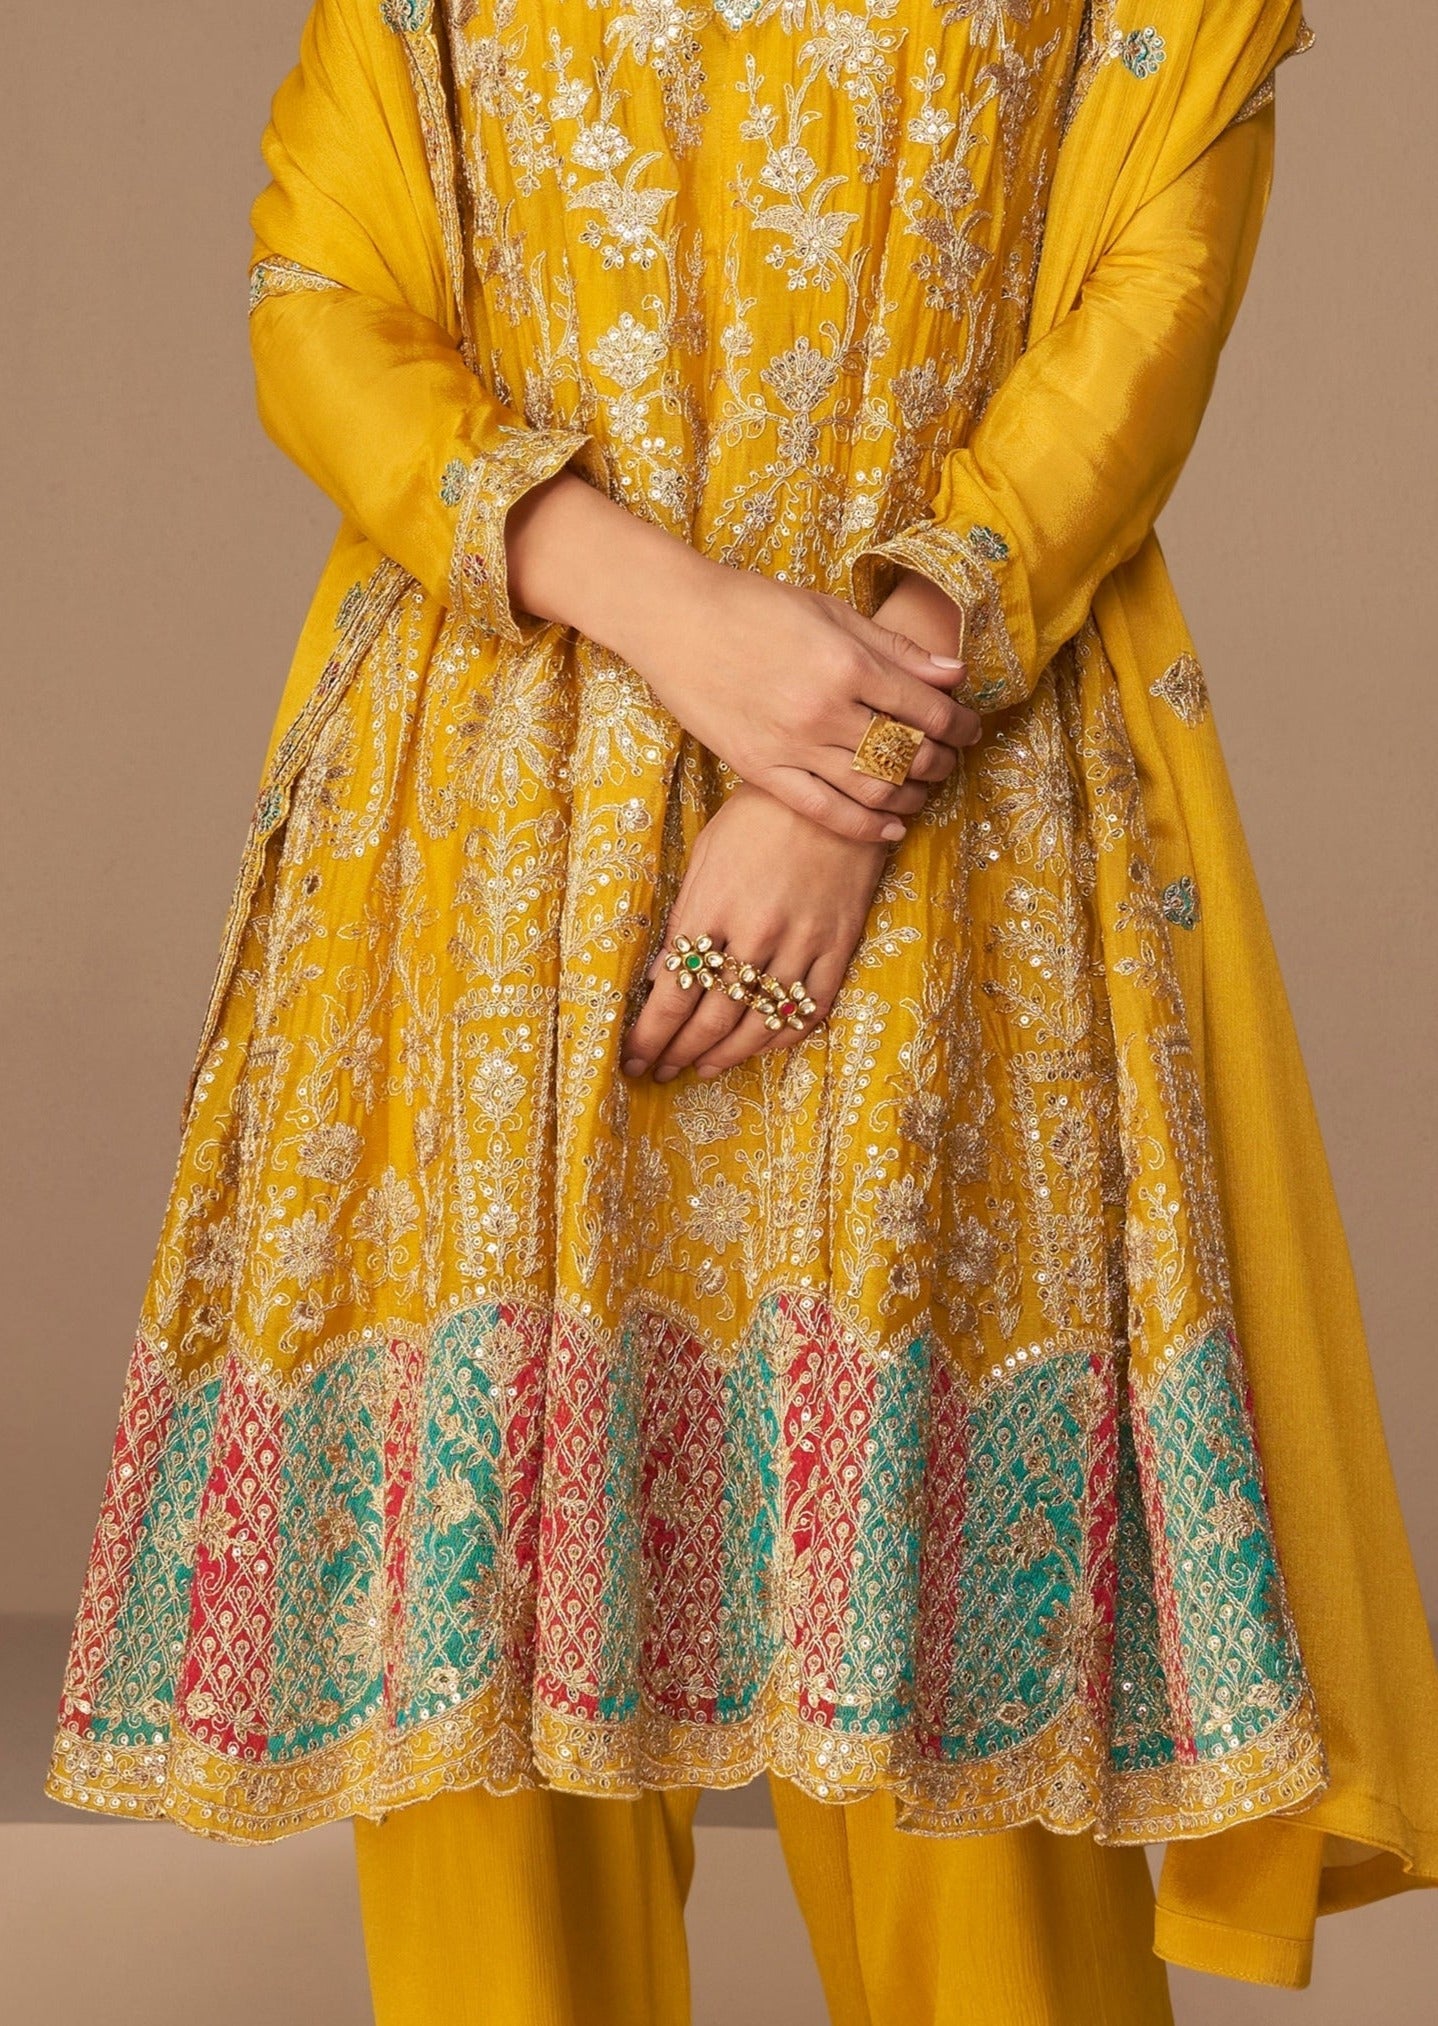 Haldi Ceremony Yellow Salwar Suit in Georgette With Sequence Embroidery in  USA, UK, Malaysia, South Africa, Dubai, Singapore